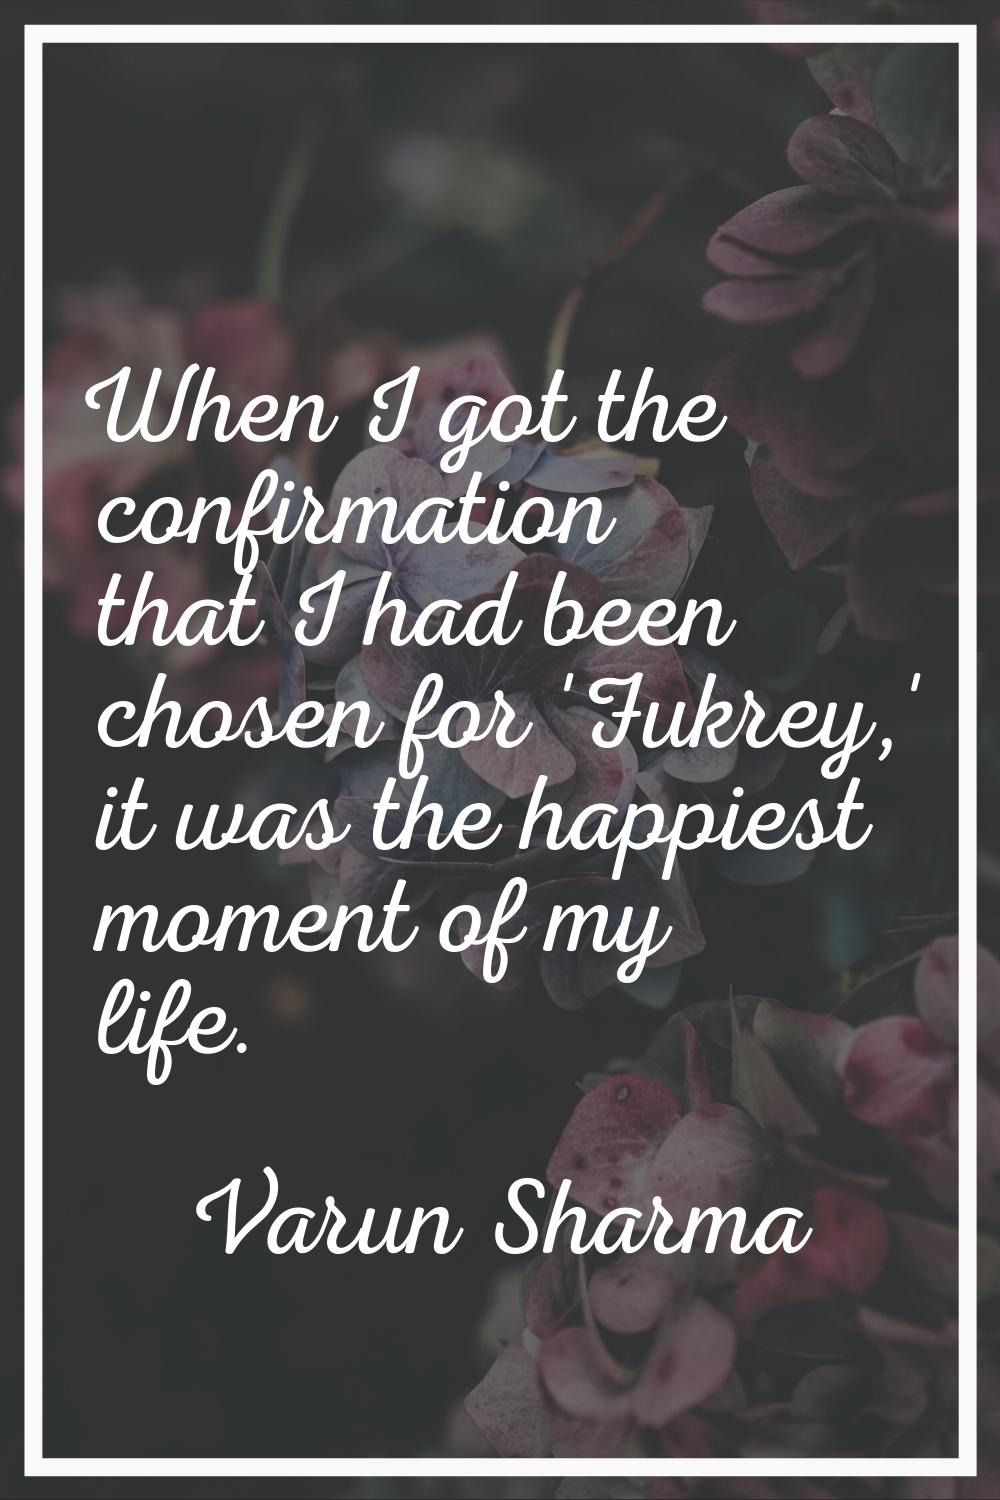 When I got the confirmation that I had been chosen for 'Fukrey,' it was the happiest moment of my l